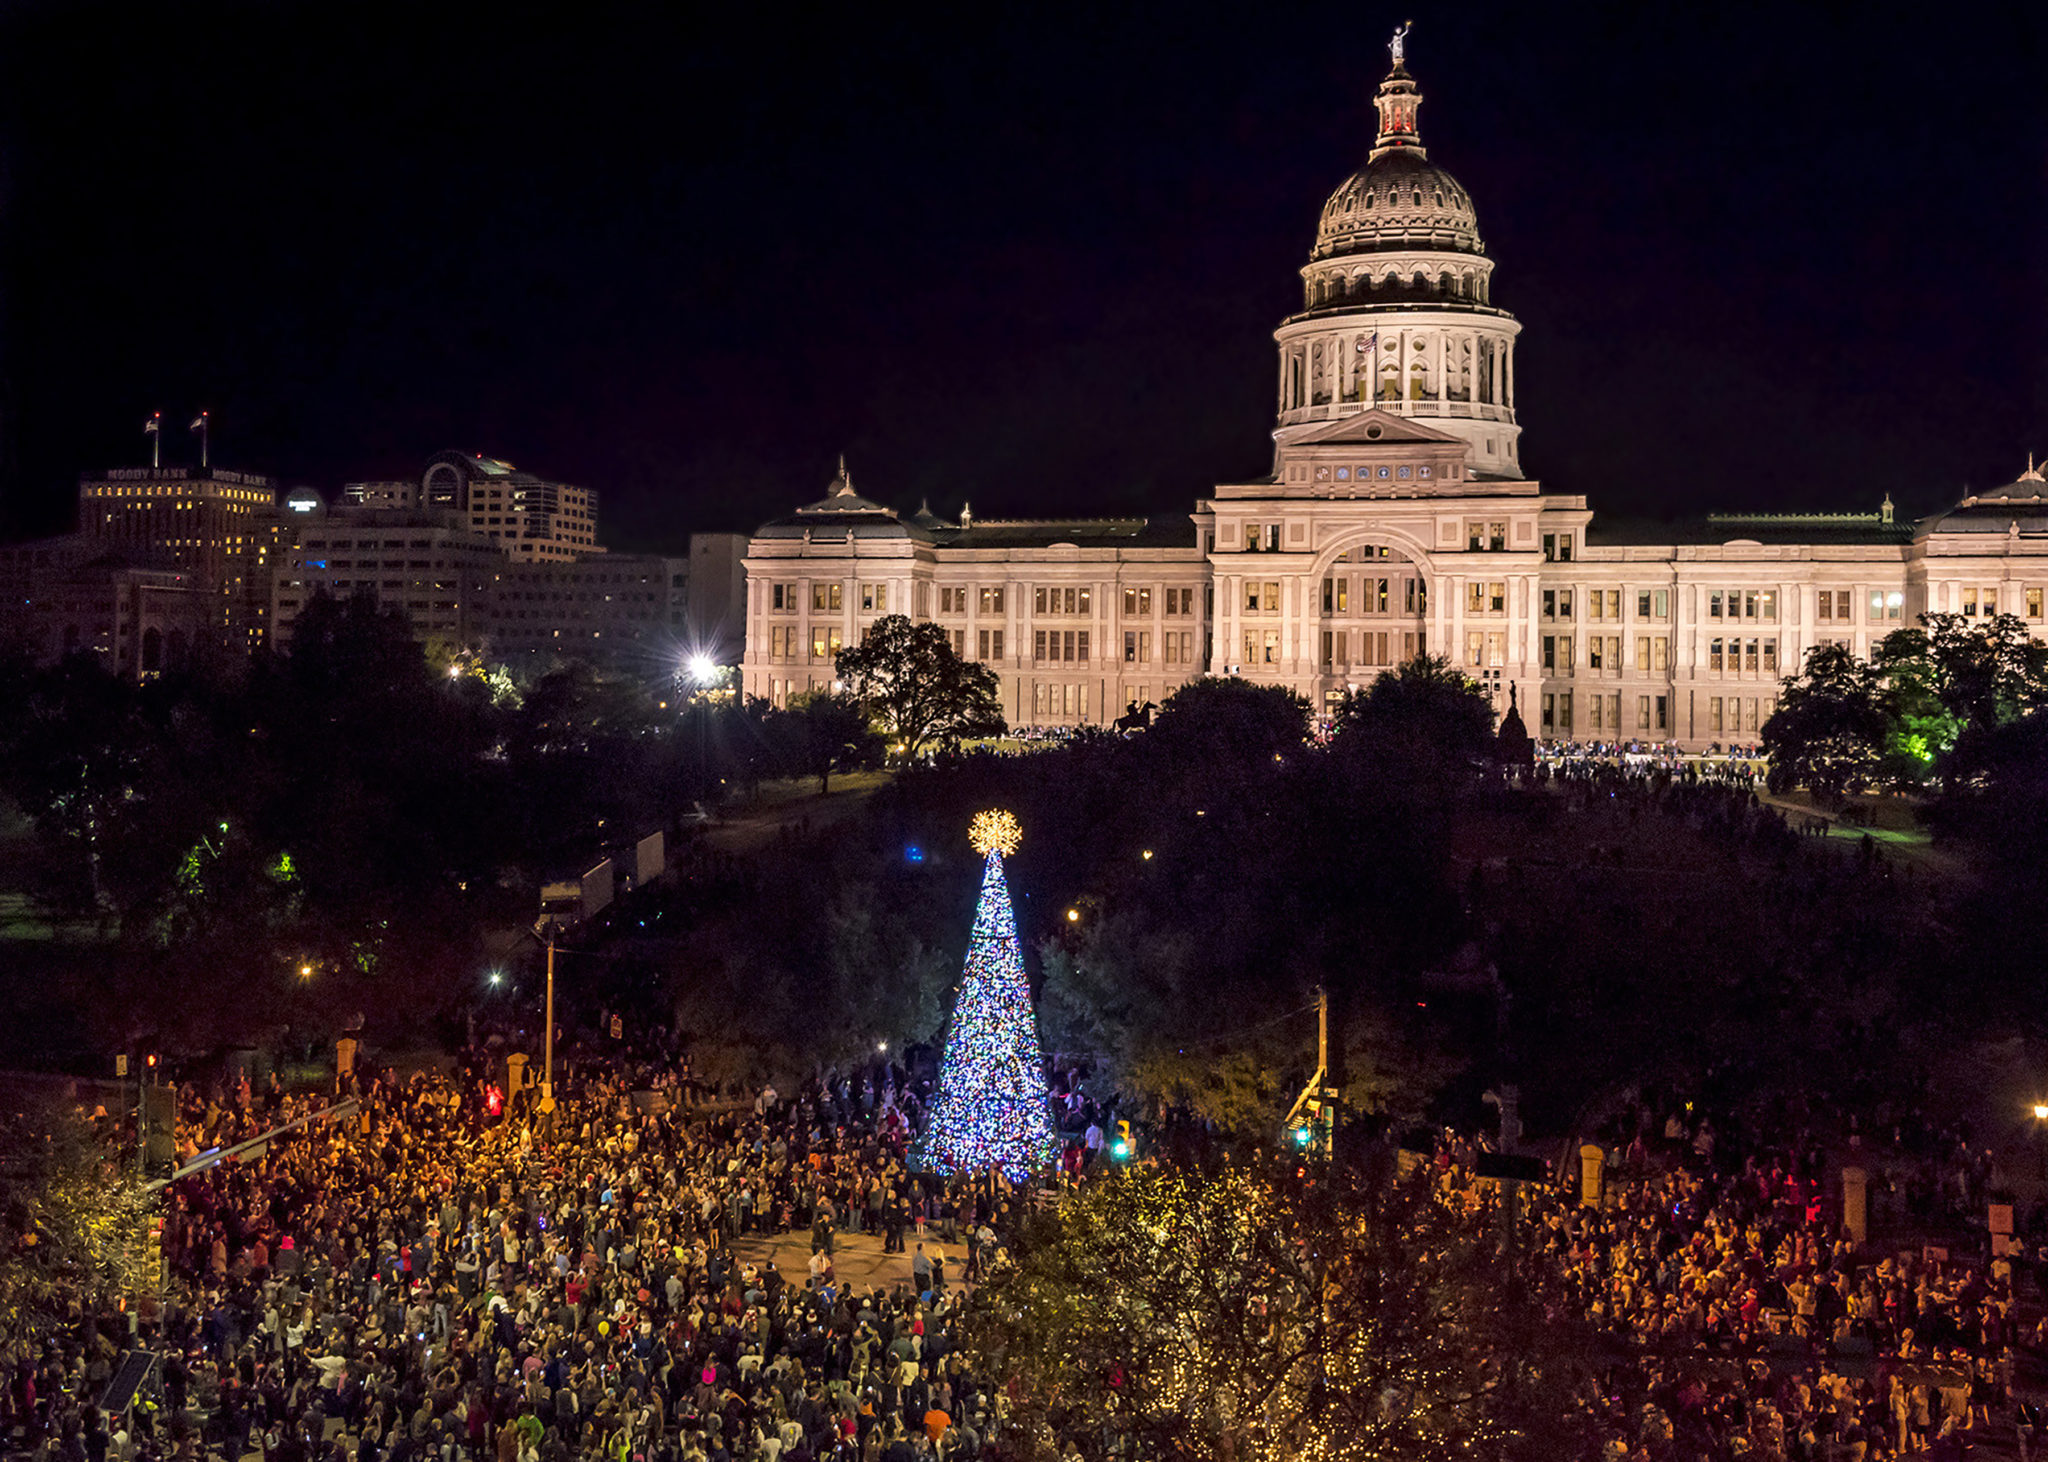 Texas State Capital with Christmas tree lit up in front